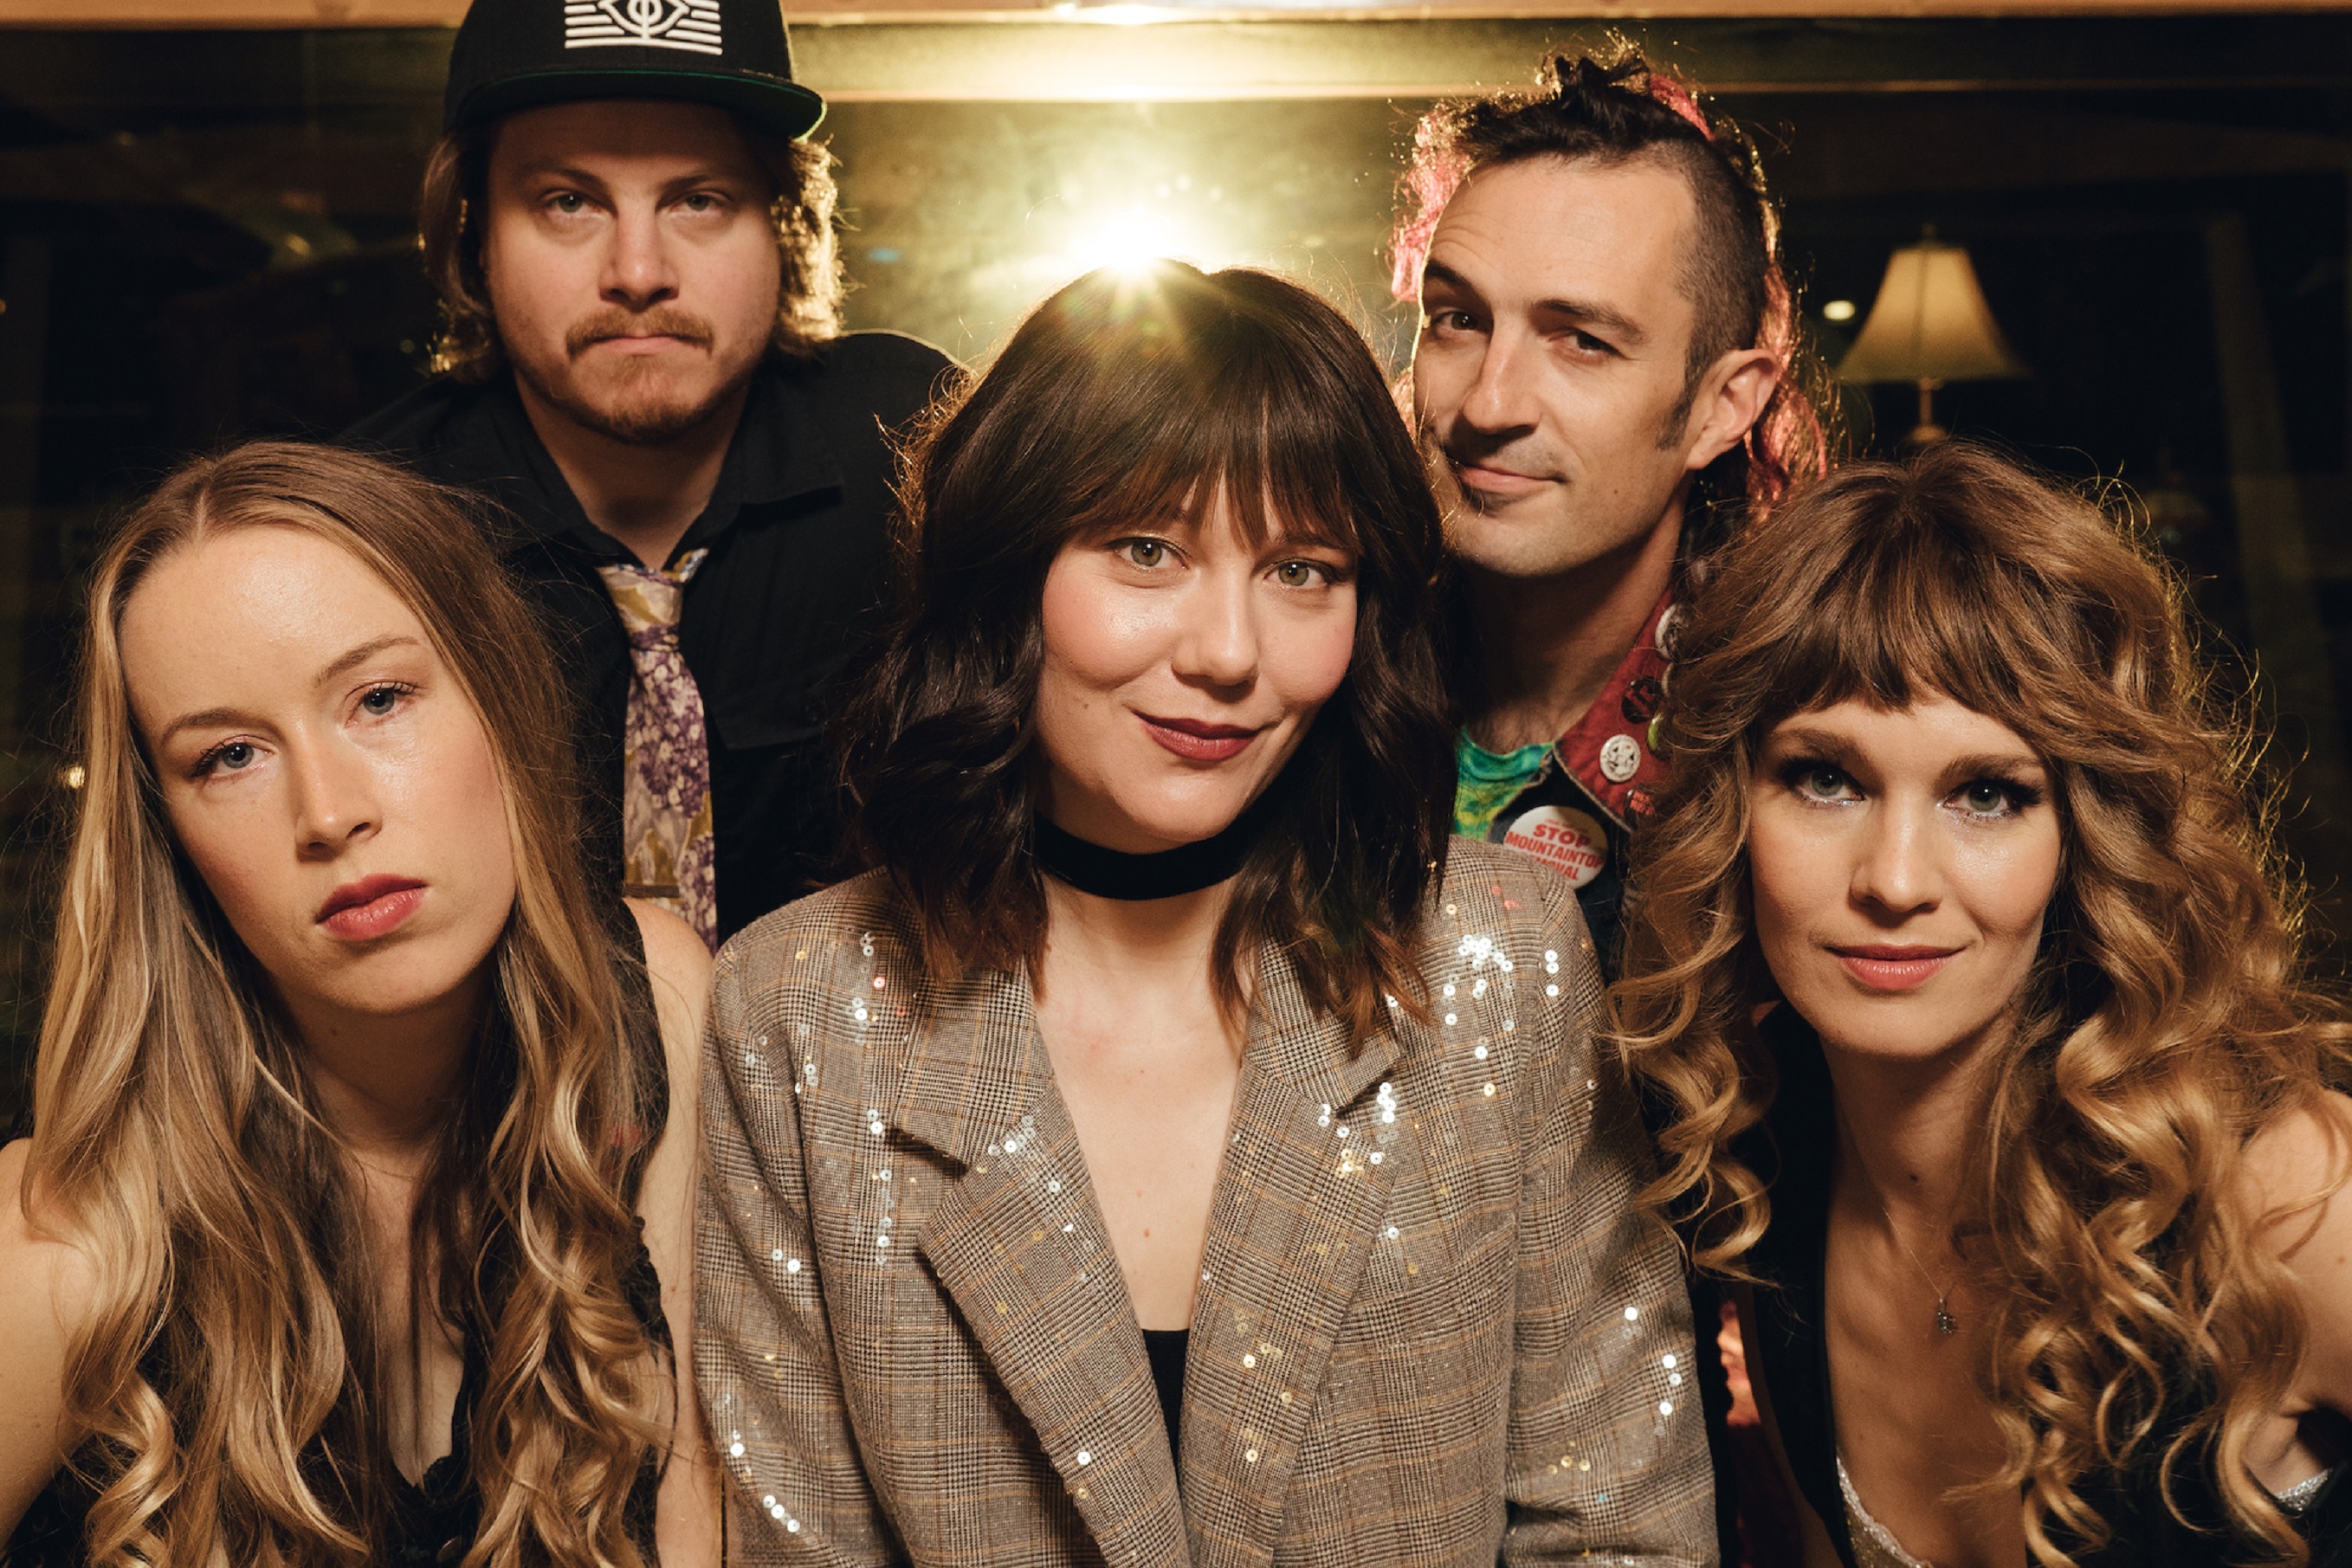 MOLLY TUTTLE & GOLDEN HIGHWAY PRESENT "DOWN THE RABBIT HOLE TOUR"